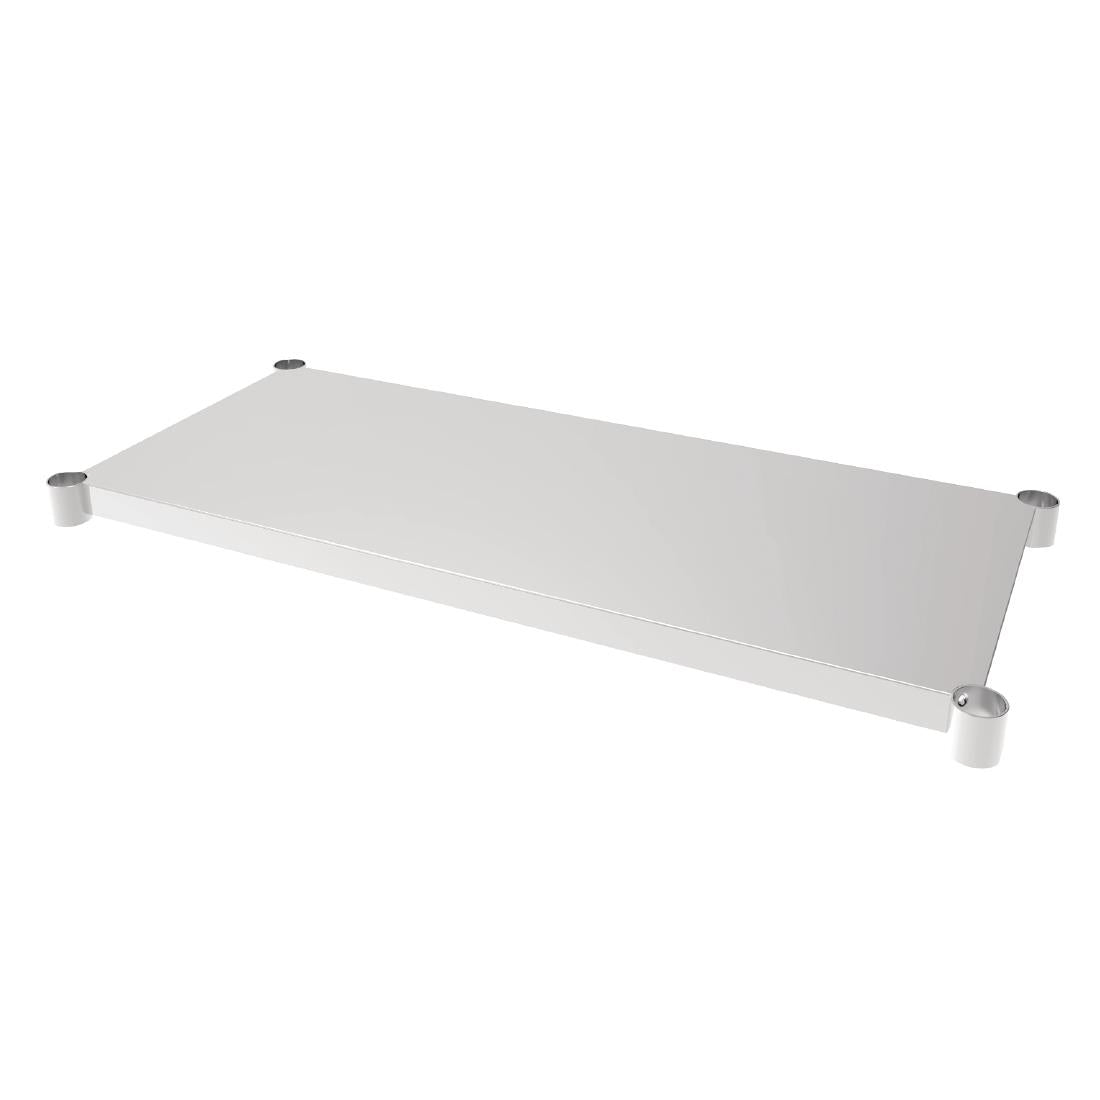 CP832 Vogue Steel Table Shelf 1200x600mm JD Catering Equipment Solutions Ltd